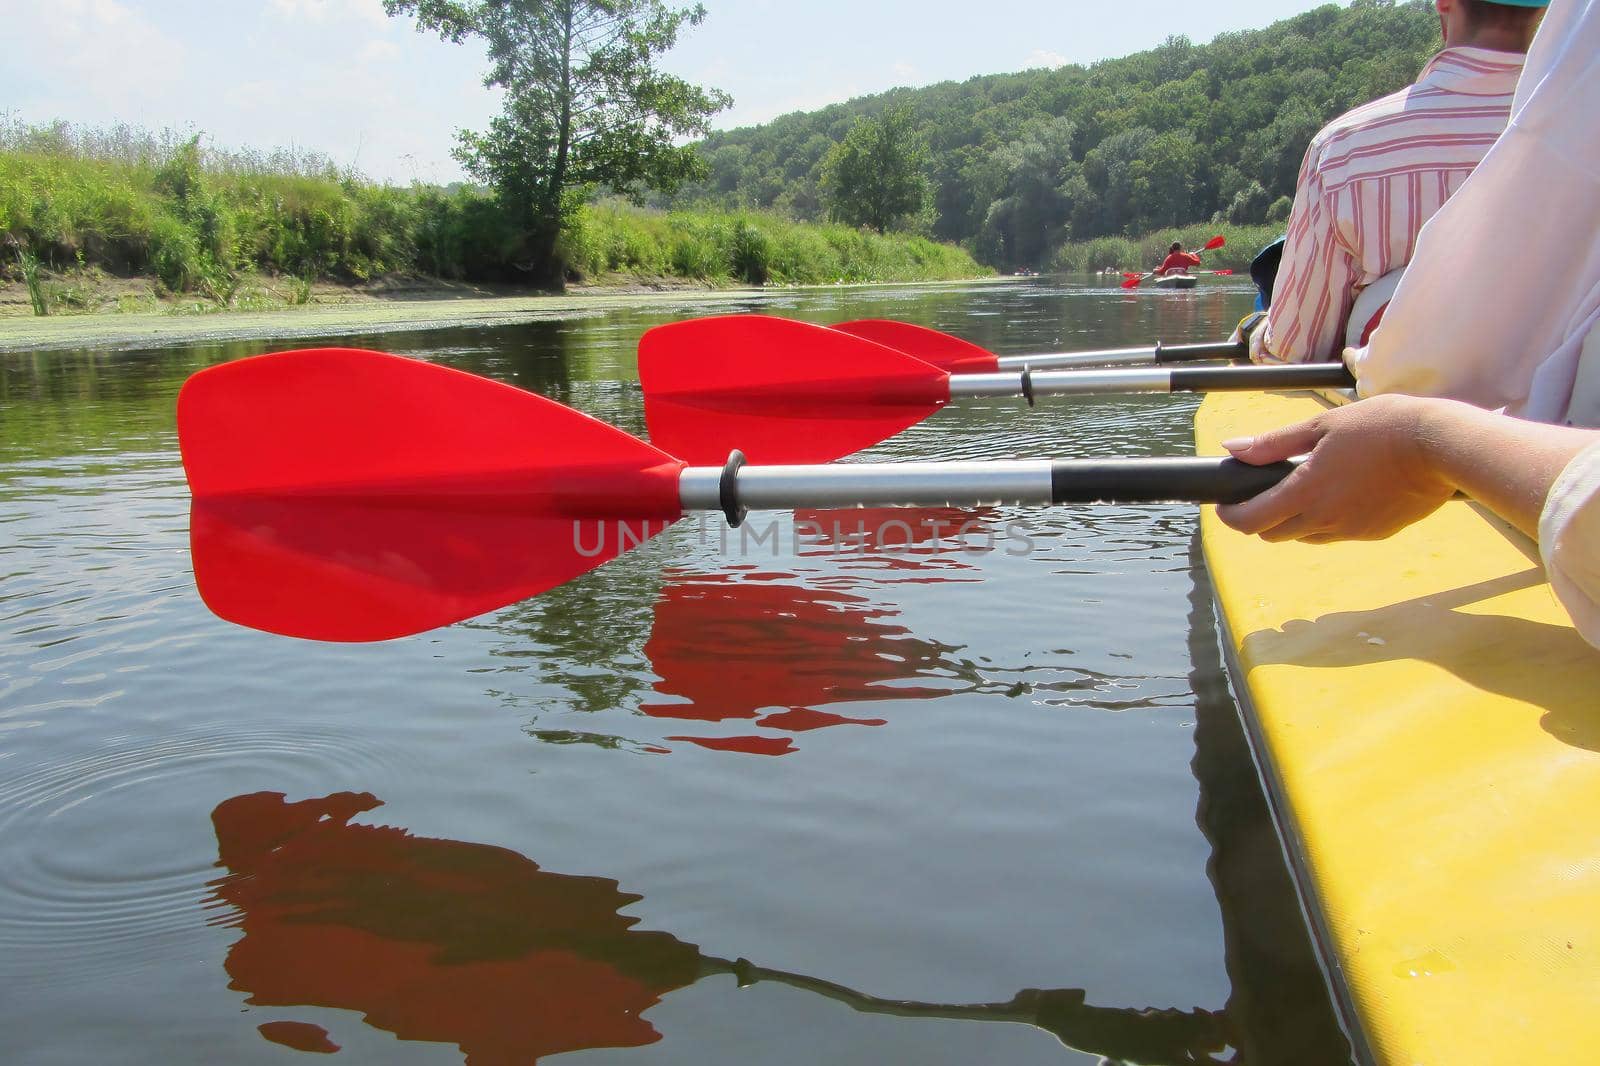 On image: Three paddles are displayed in a row in the hands of the people floating in the kayak. The paddles are reflected in the calm water. the floating people in the yellow kayak are holding red paddles